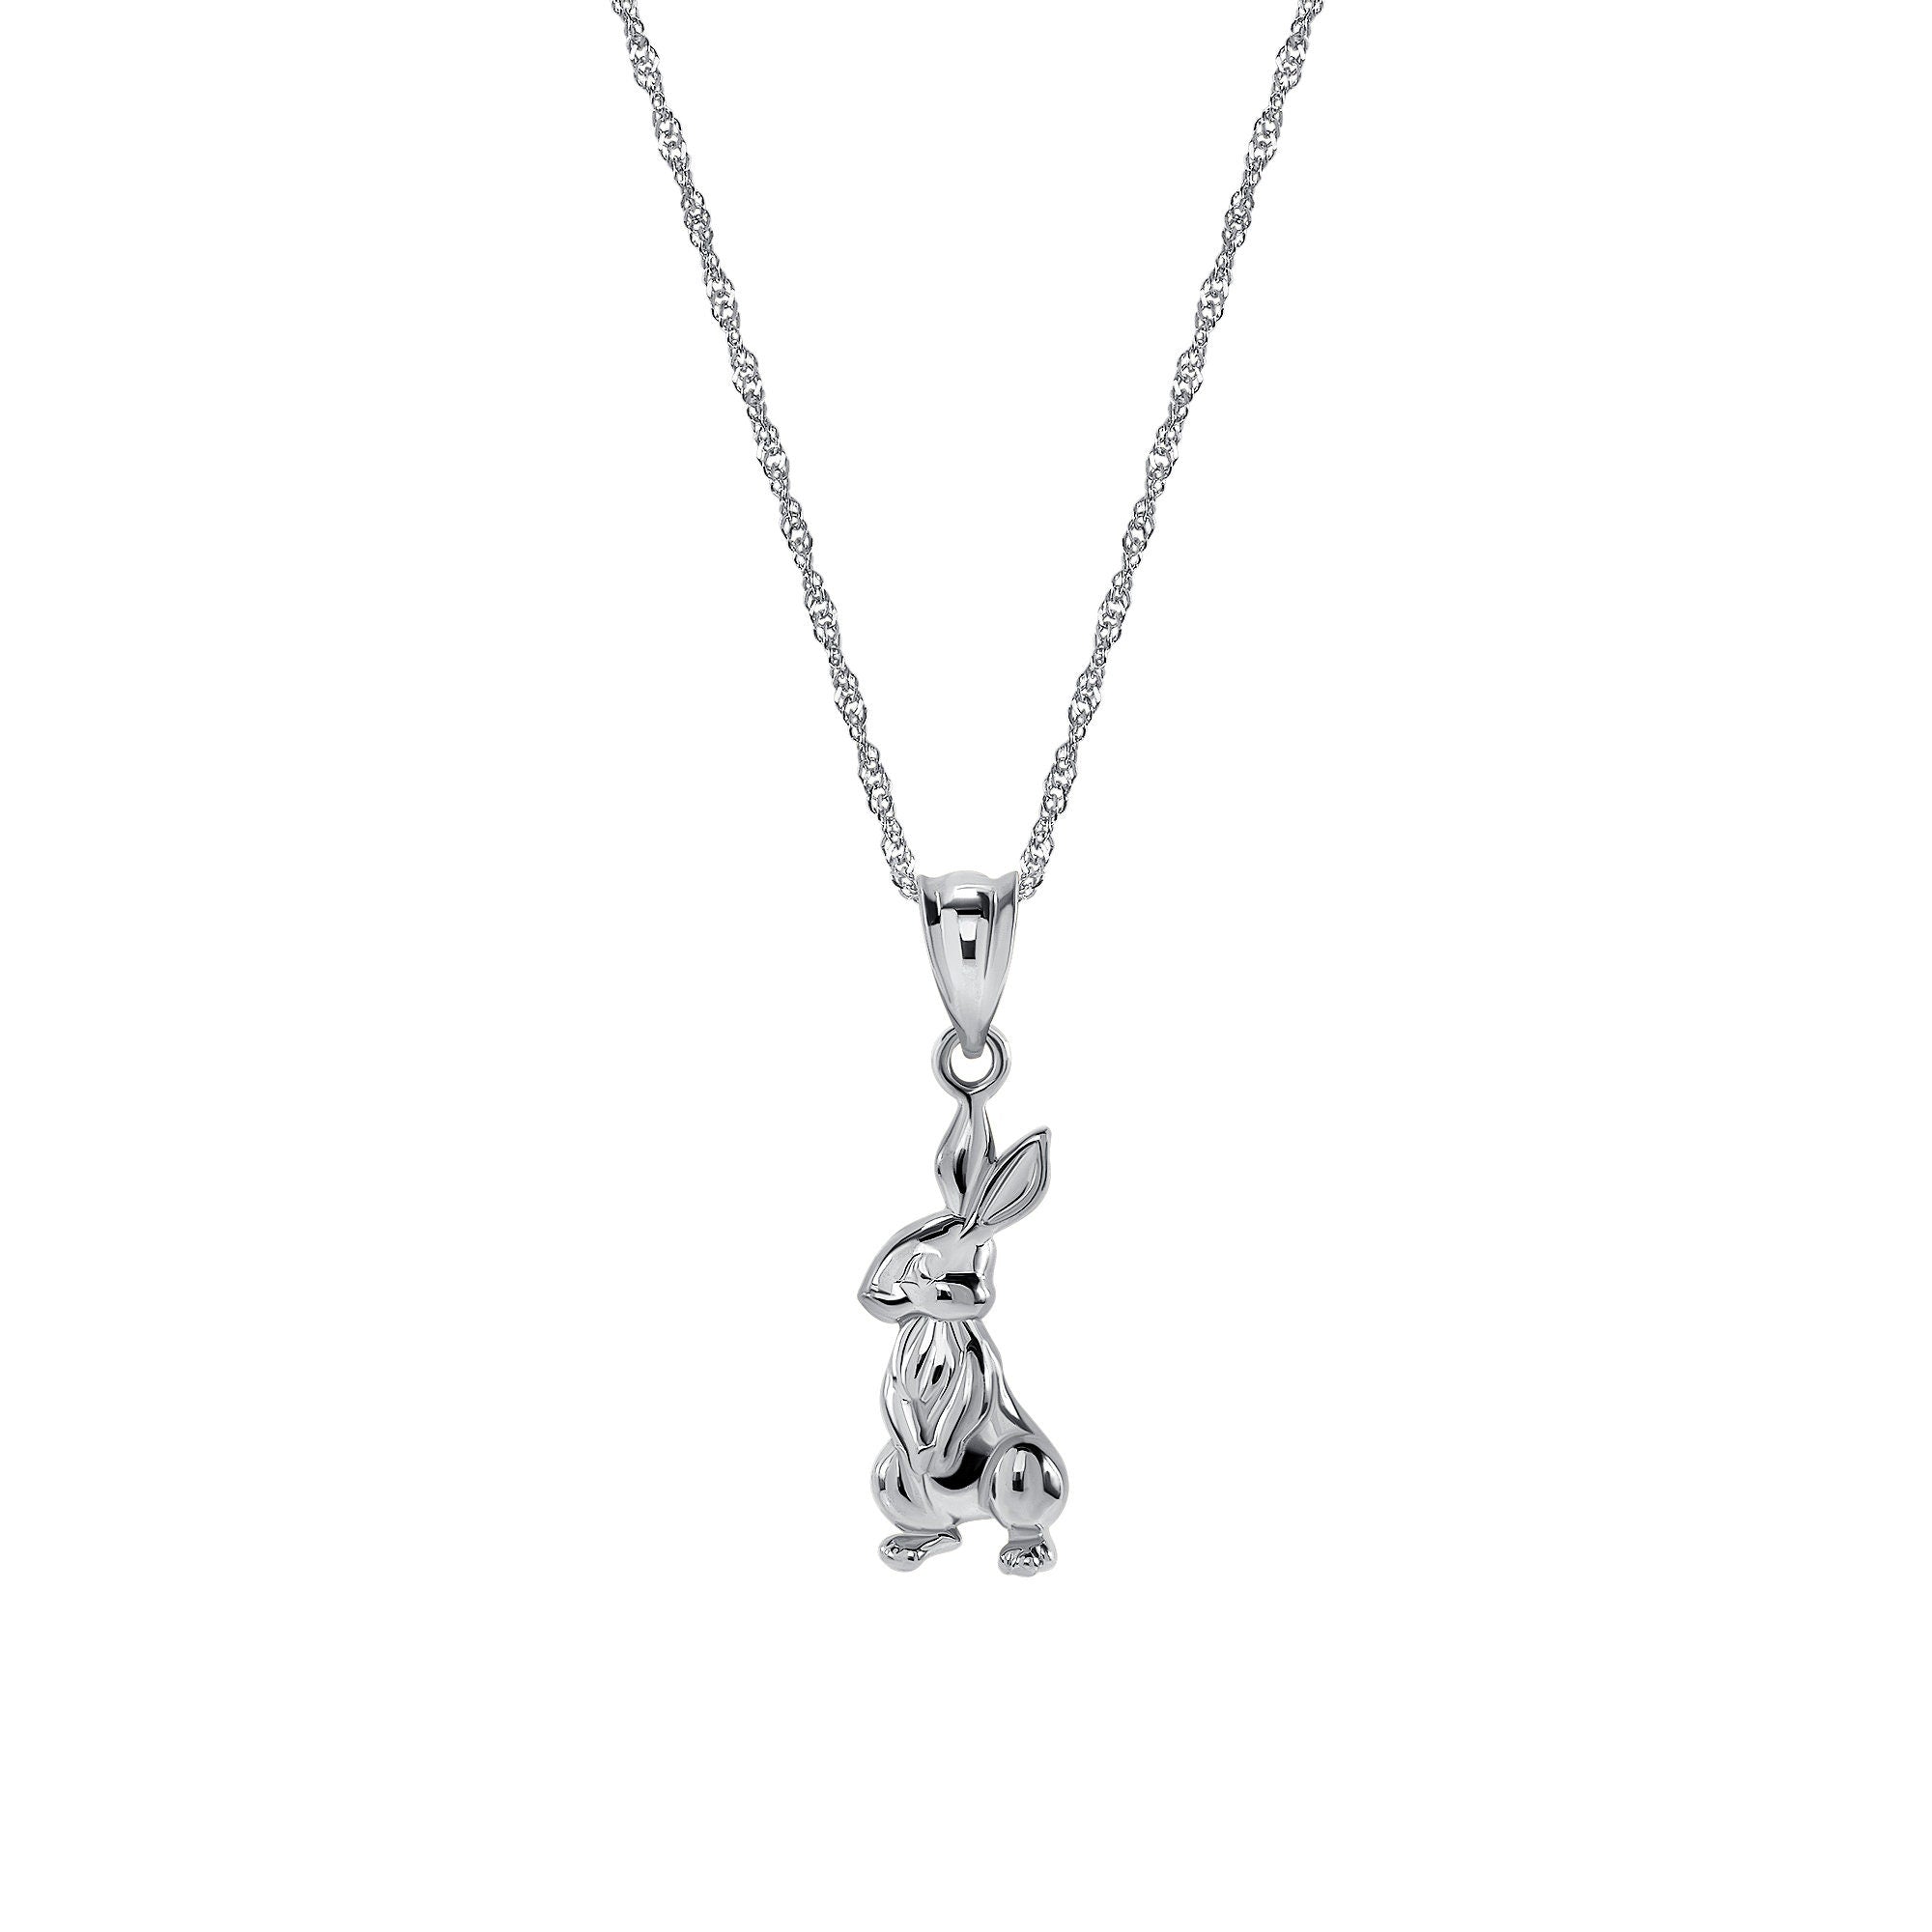 14k solid gold Easter Bunny pendant on 18" solid gold chain